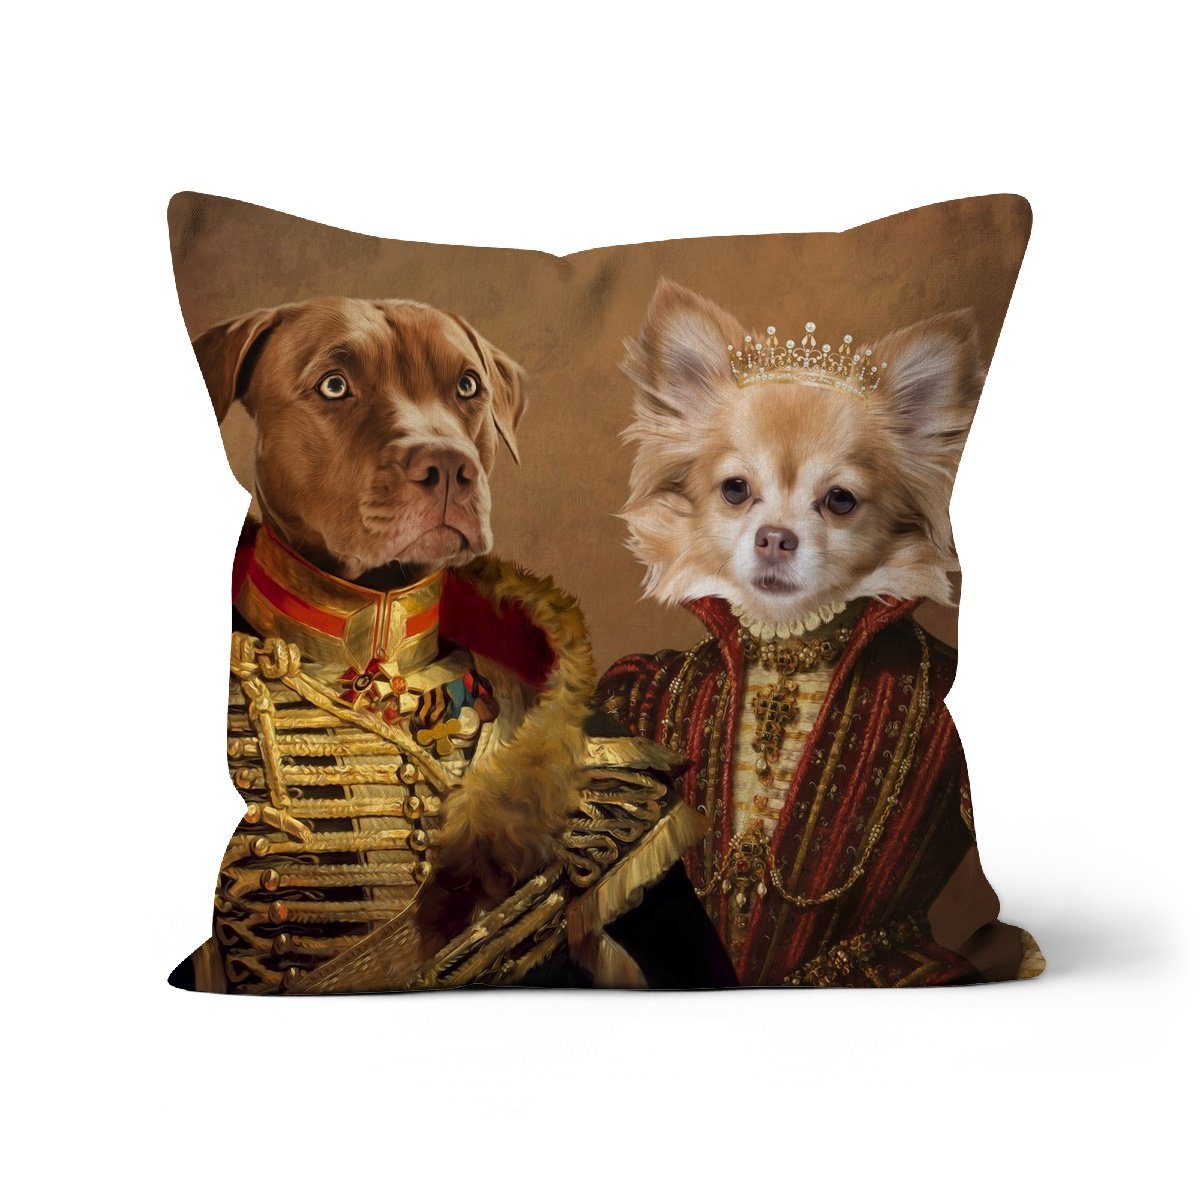 The Betrothed: Custom Pet Cushion - Paw & Glory - #pet portraits# - #dog portraits# - #pet portraits uk#paw & glory, pet portraits pillow,custom pet pillows, pillow personalized, custom pillow cover, dog personalized pillow, pillow with pet picture